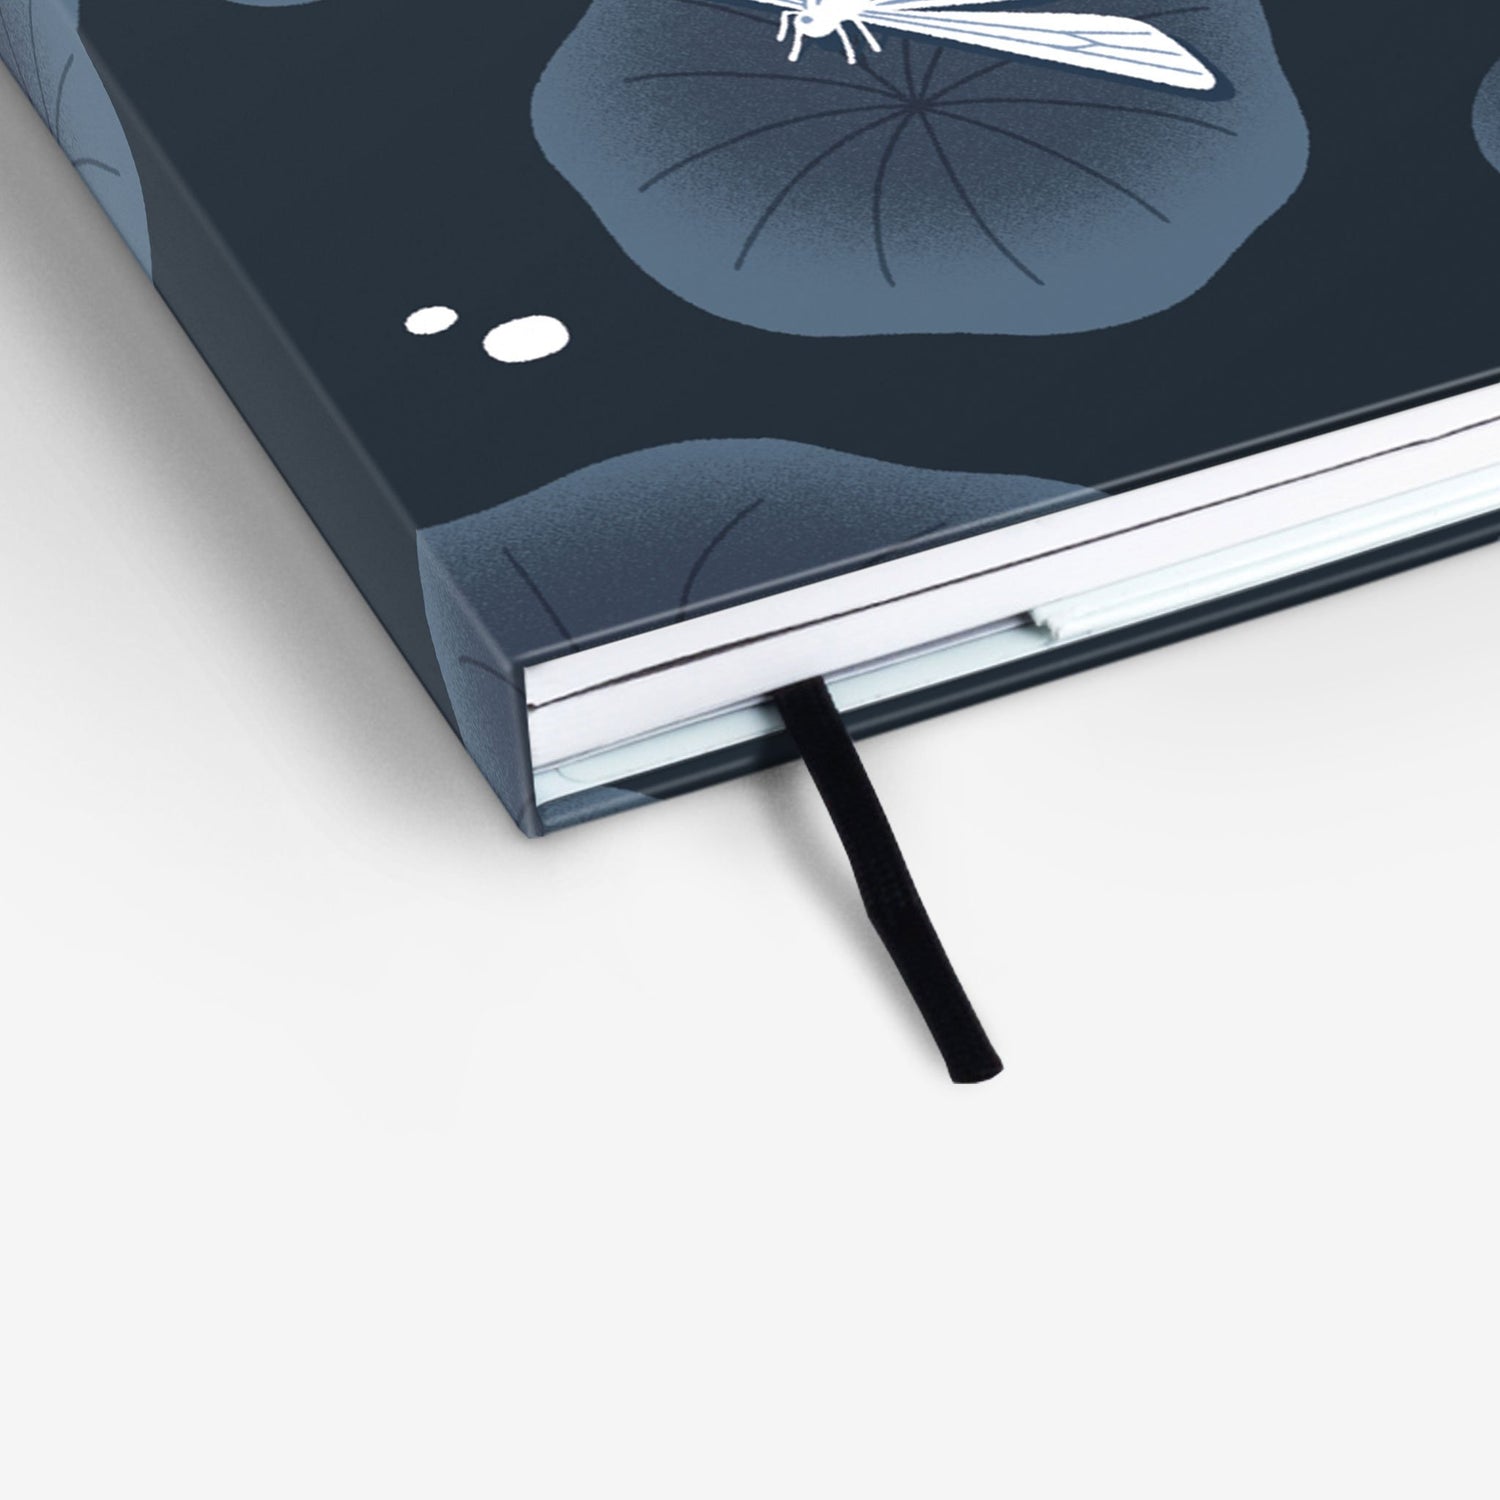 Dragonfly Twinbook